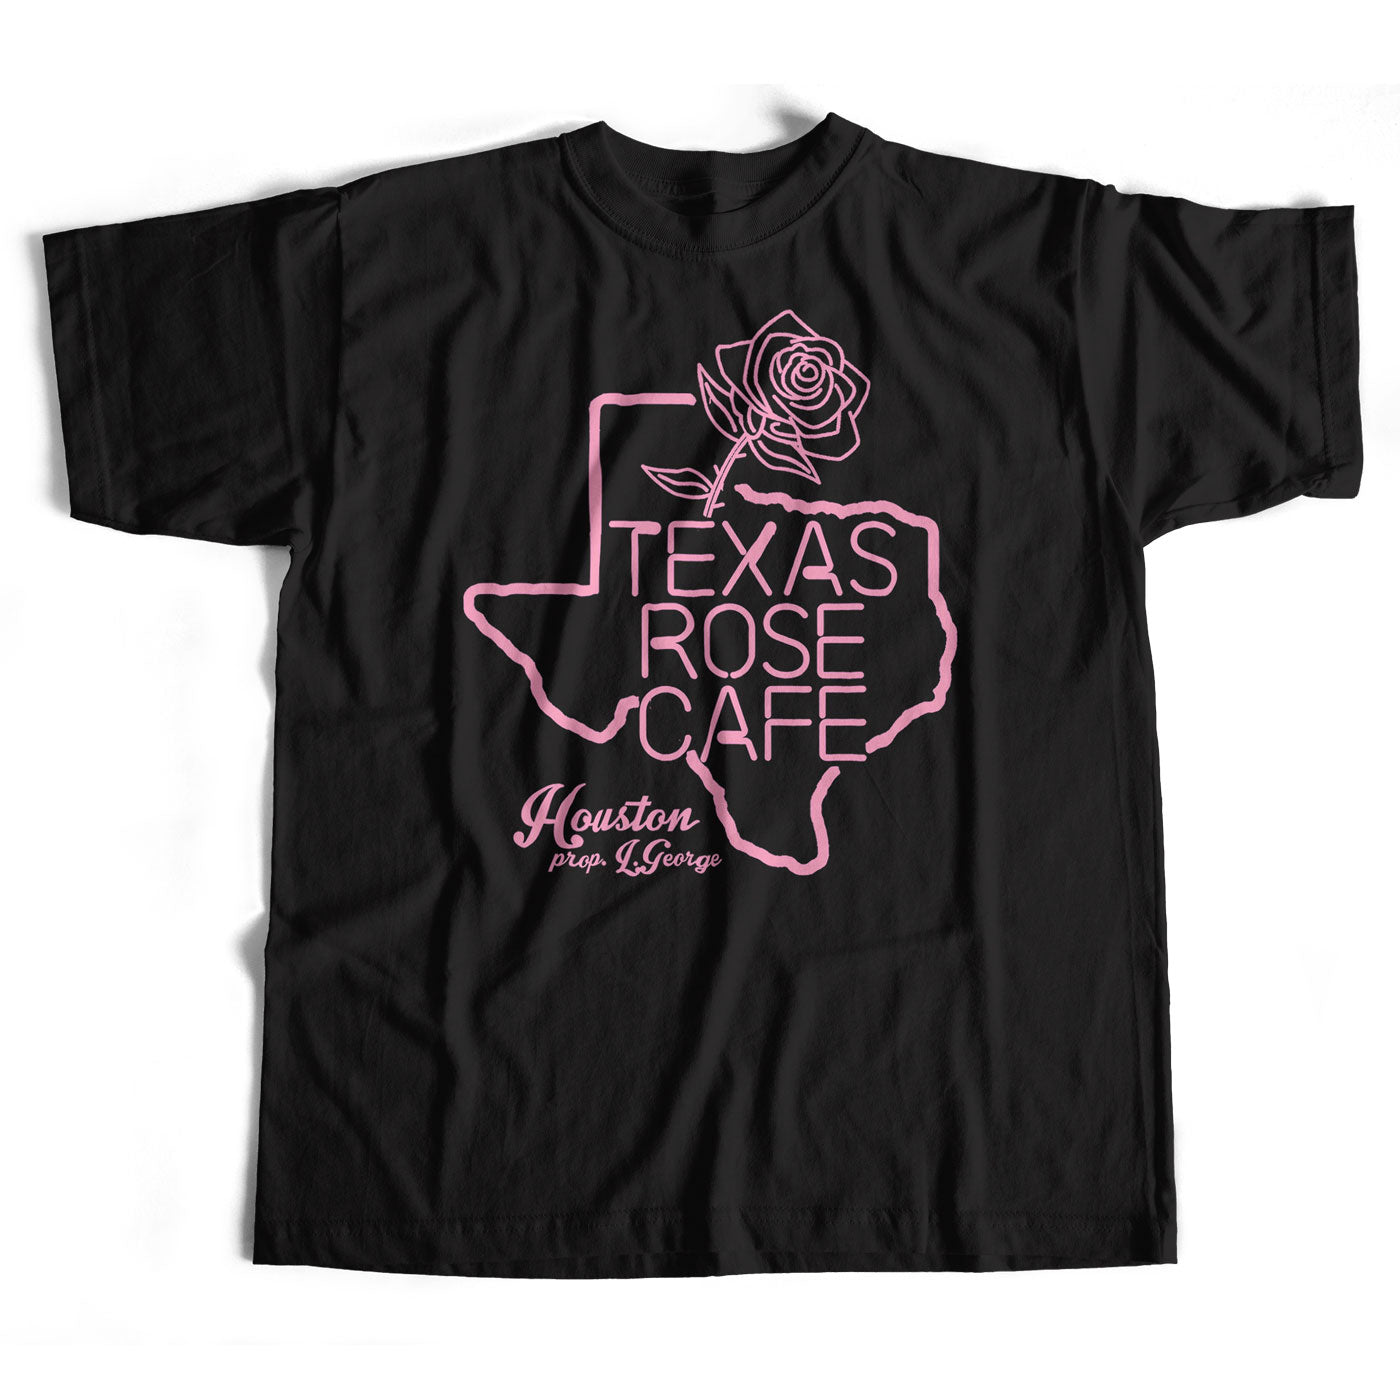 Inspired by Little Feat T Shirt - Texas Rose Cafe